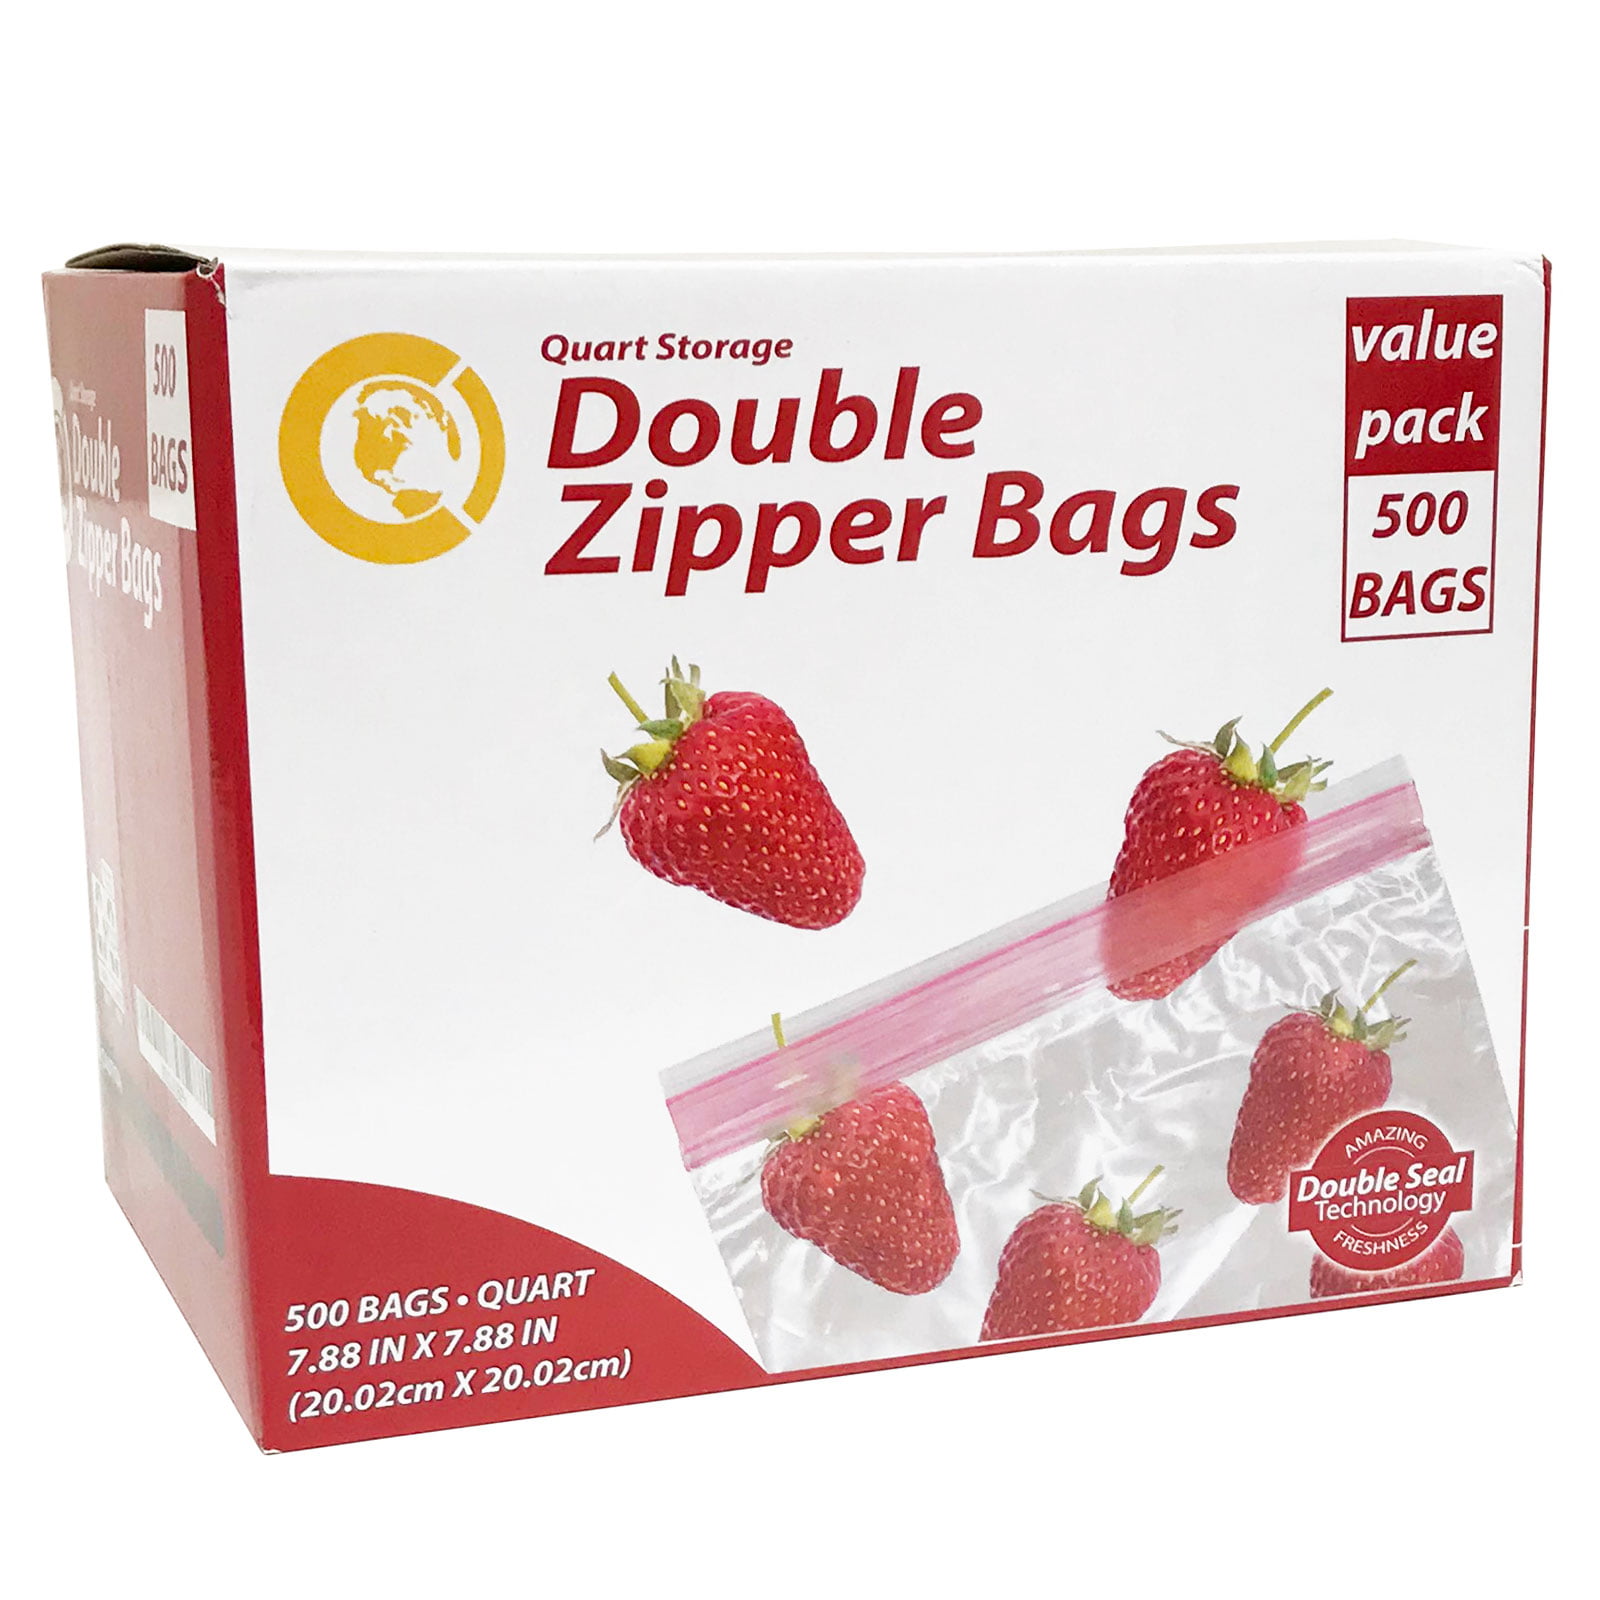 Commercial Bargains Zipper Storage Bags With Double Seal Technology, For  Food, Sandwich, Organization, Travel, and More, Quart, 500 Count 